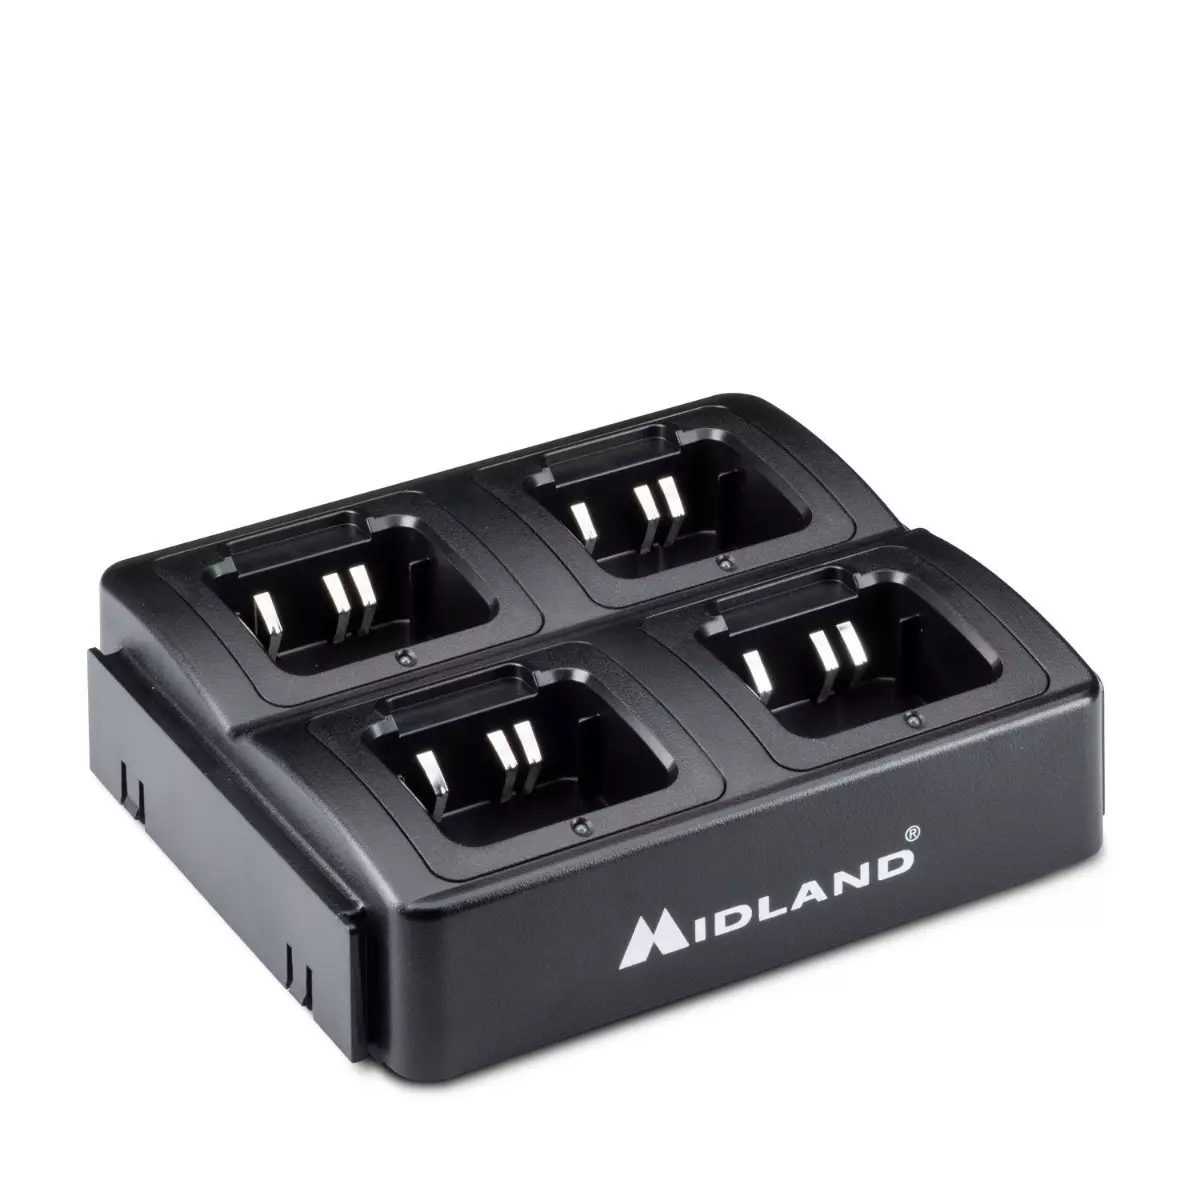 Chargeur MIDLAND Multi CA-G10 Pro  G13 - C1541.01